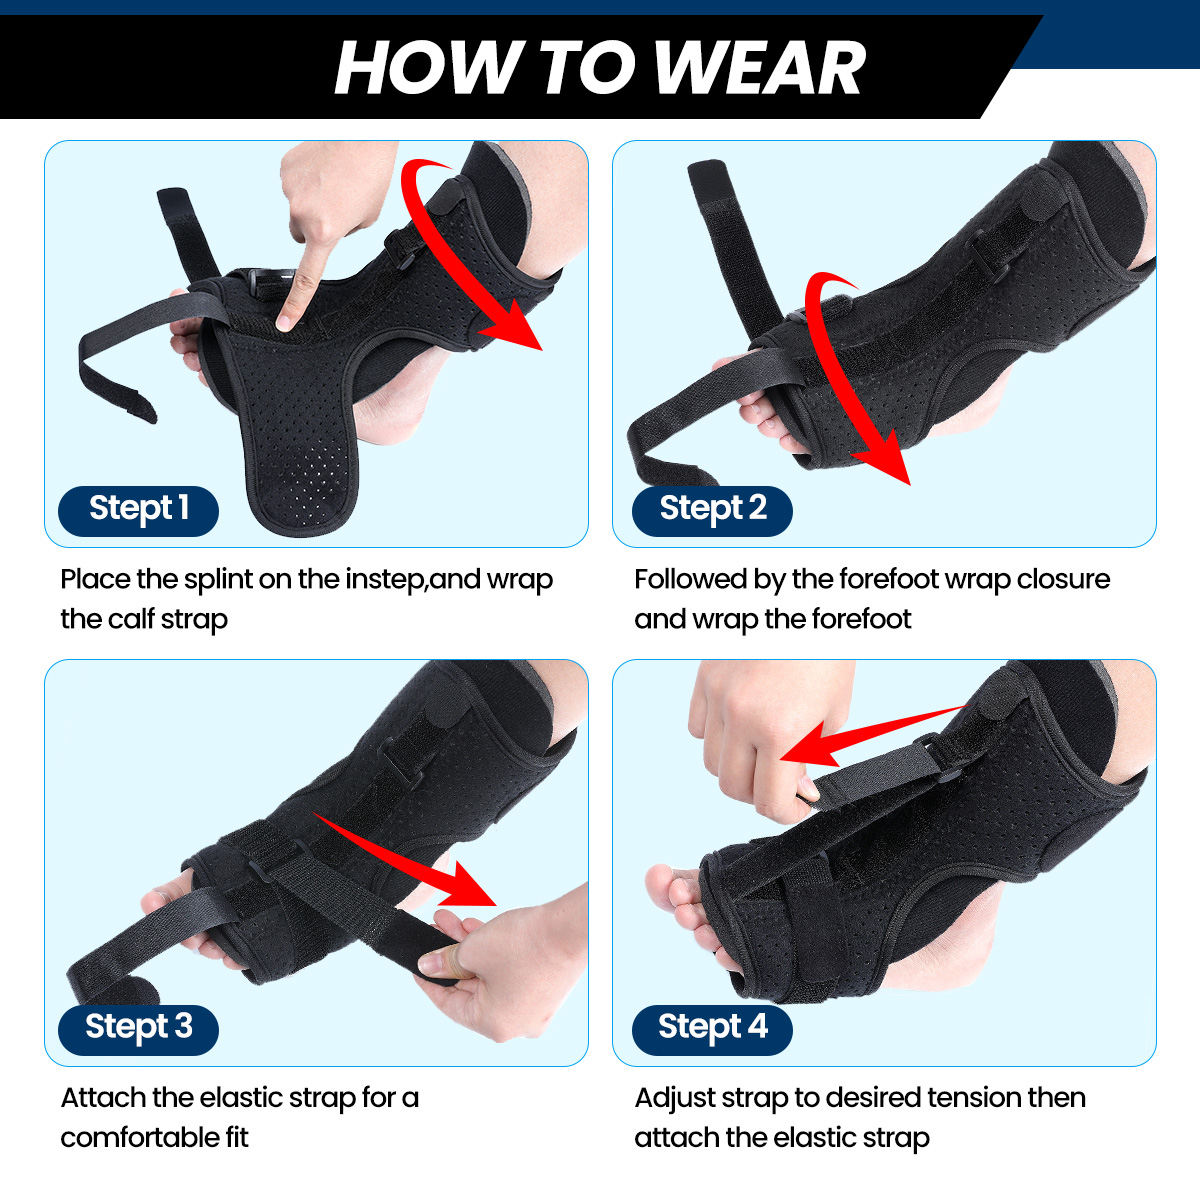 OUTERDO-Foot-Drop-Orthosis-with-Fitness-Ball-Adjustable-Plantar-Fasciitis-Night-Splint-Brace-Support-1891293-5